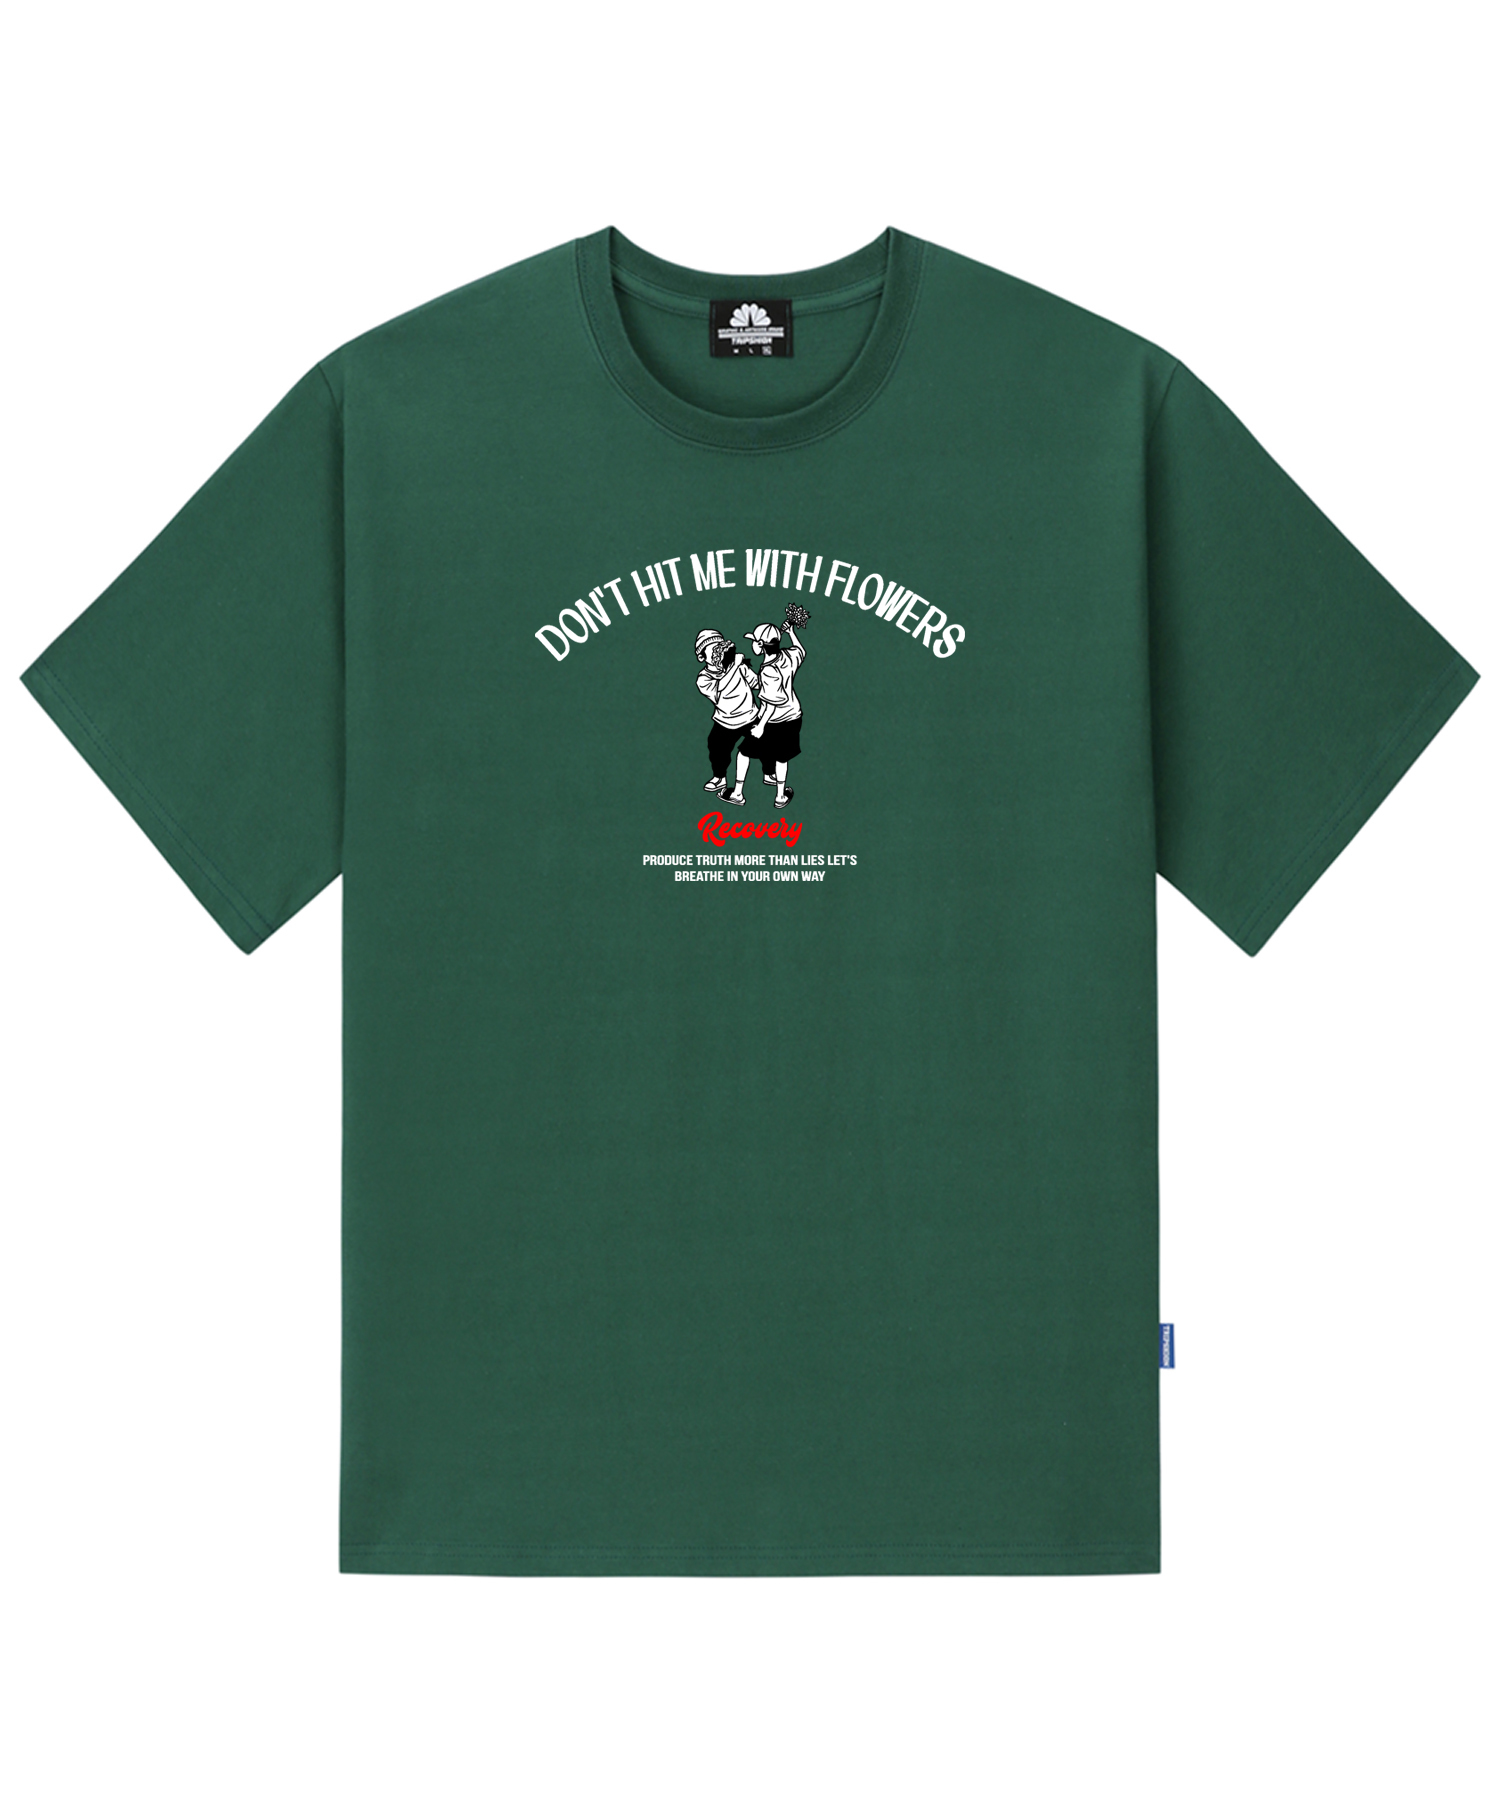 DON’T HIT ME WITH FLOWERS GRAPHIC T-SHIRTS - GREEN